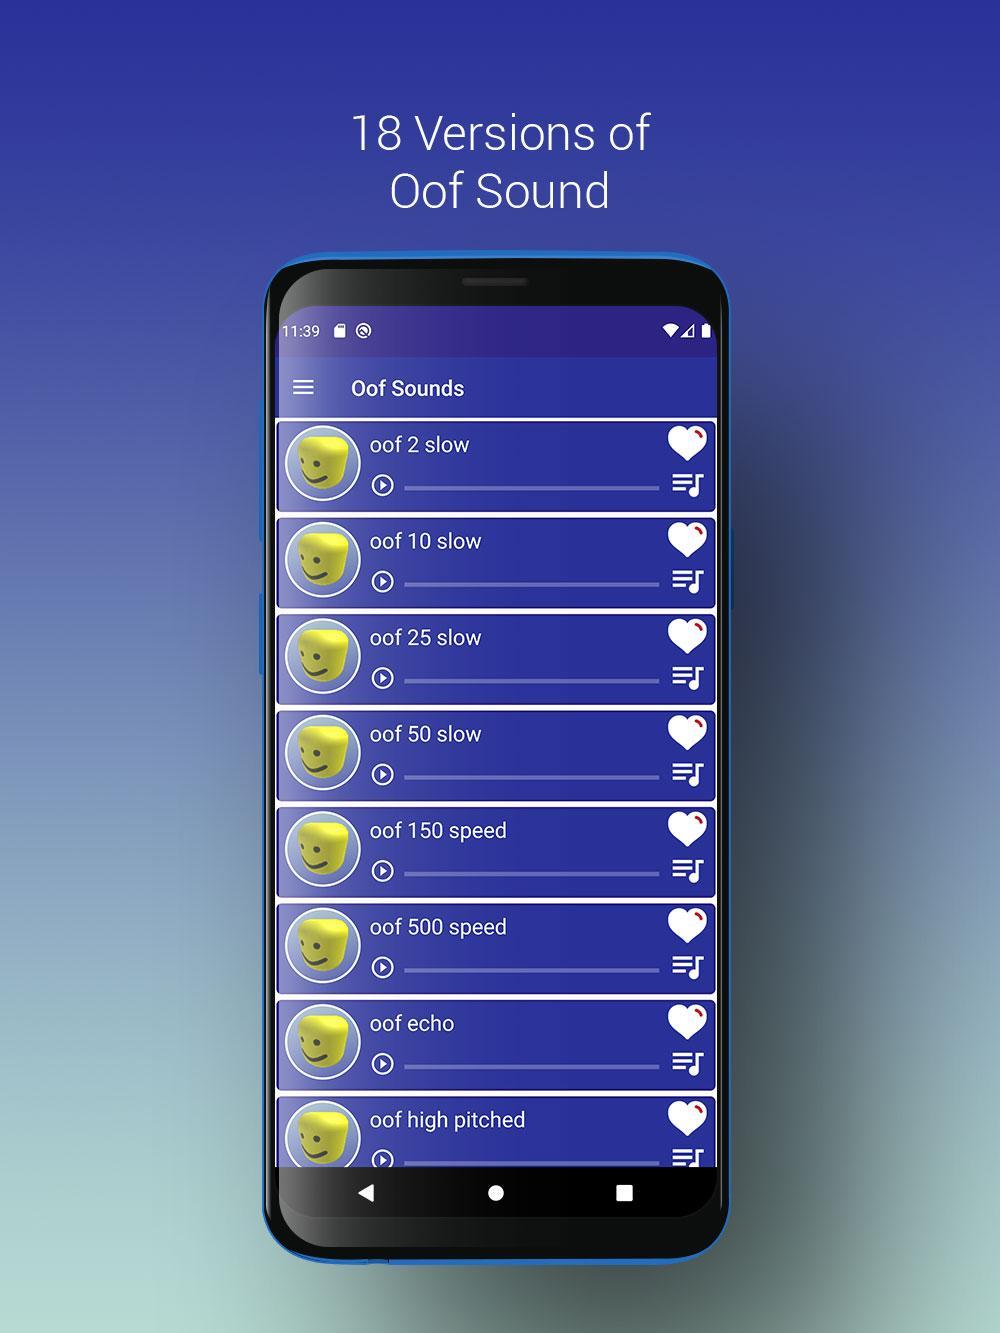 Roblox Oof Soundboard For Android Apk Download - roblox oof 1 hour